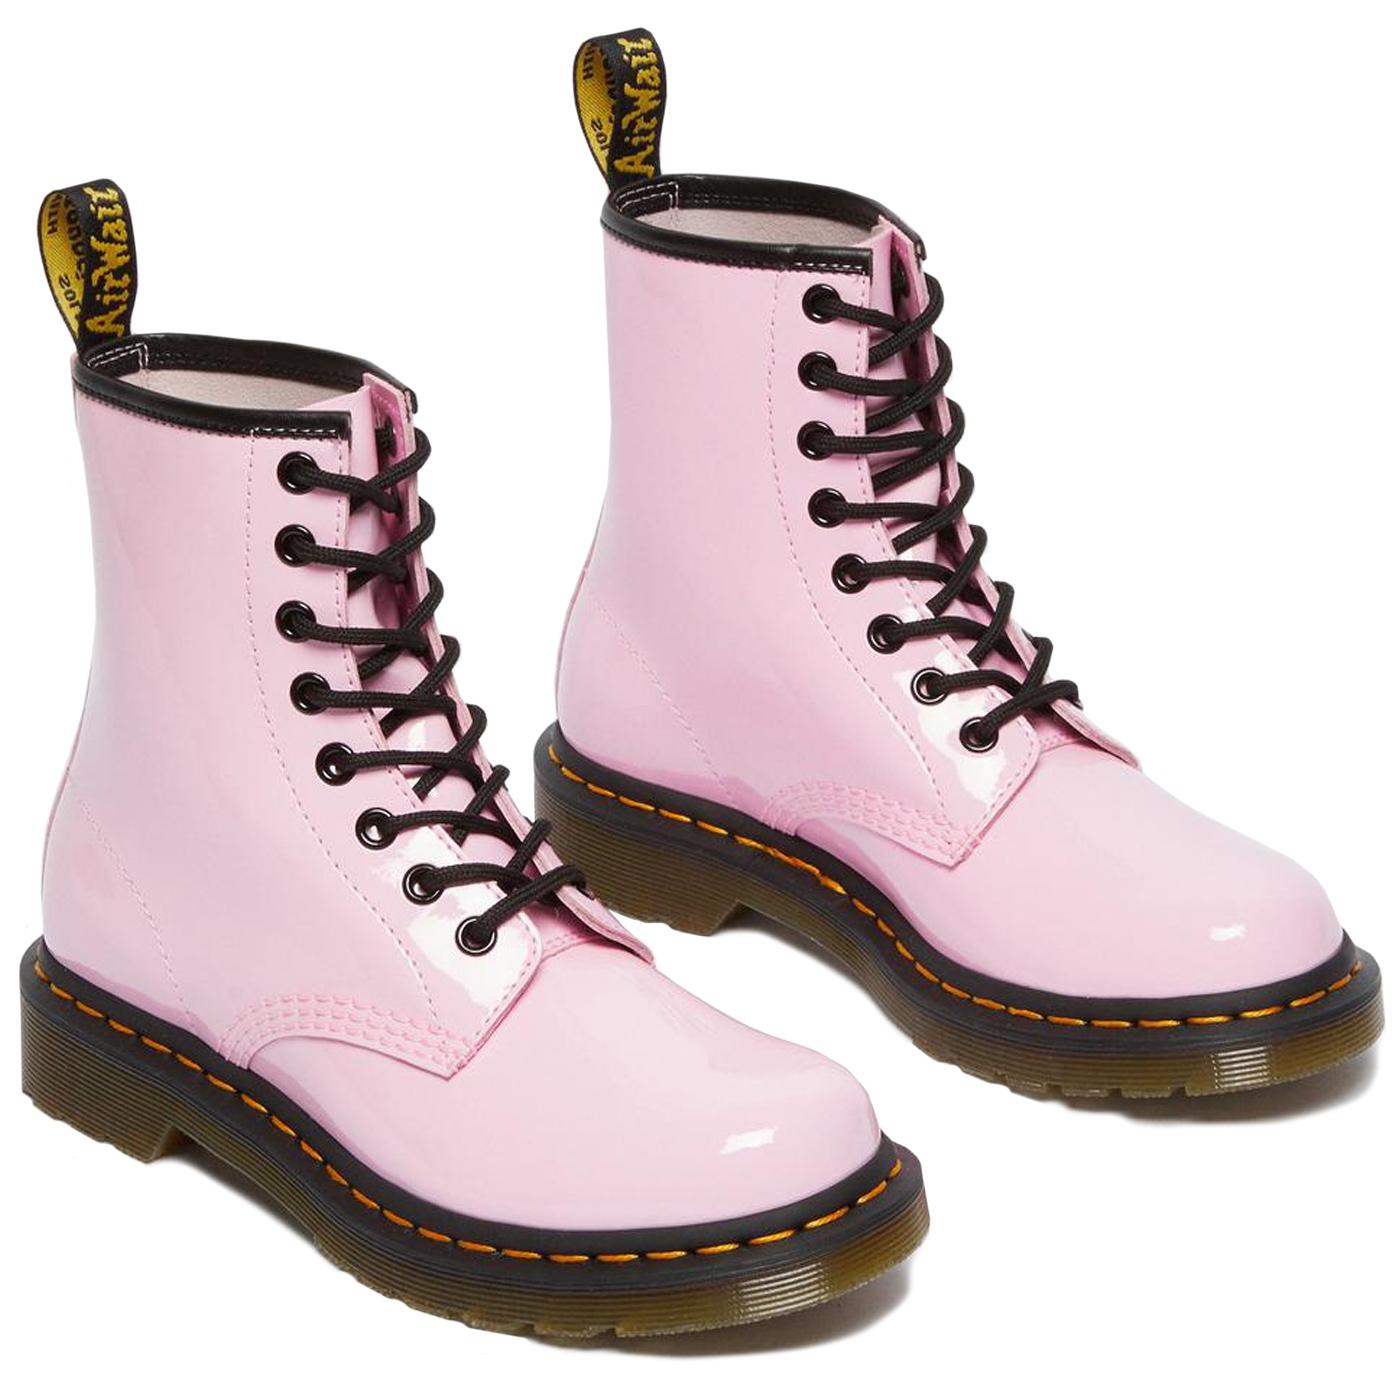 DR MARTENS 1460 Womens Patent Lamper Boots in Pale Pink